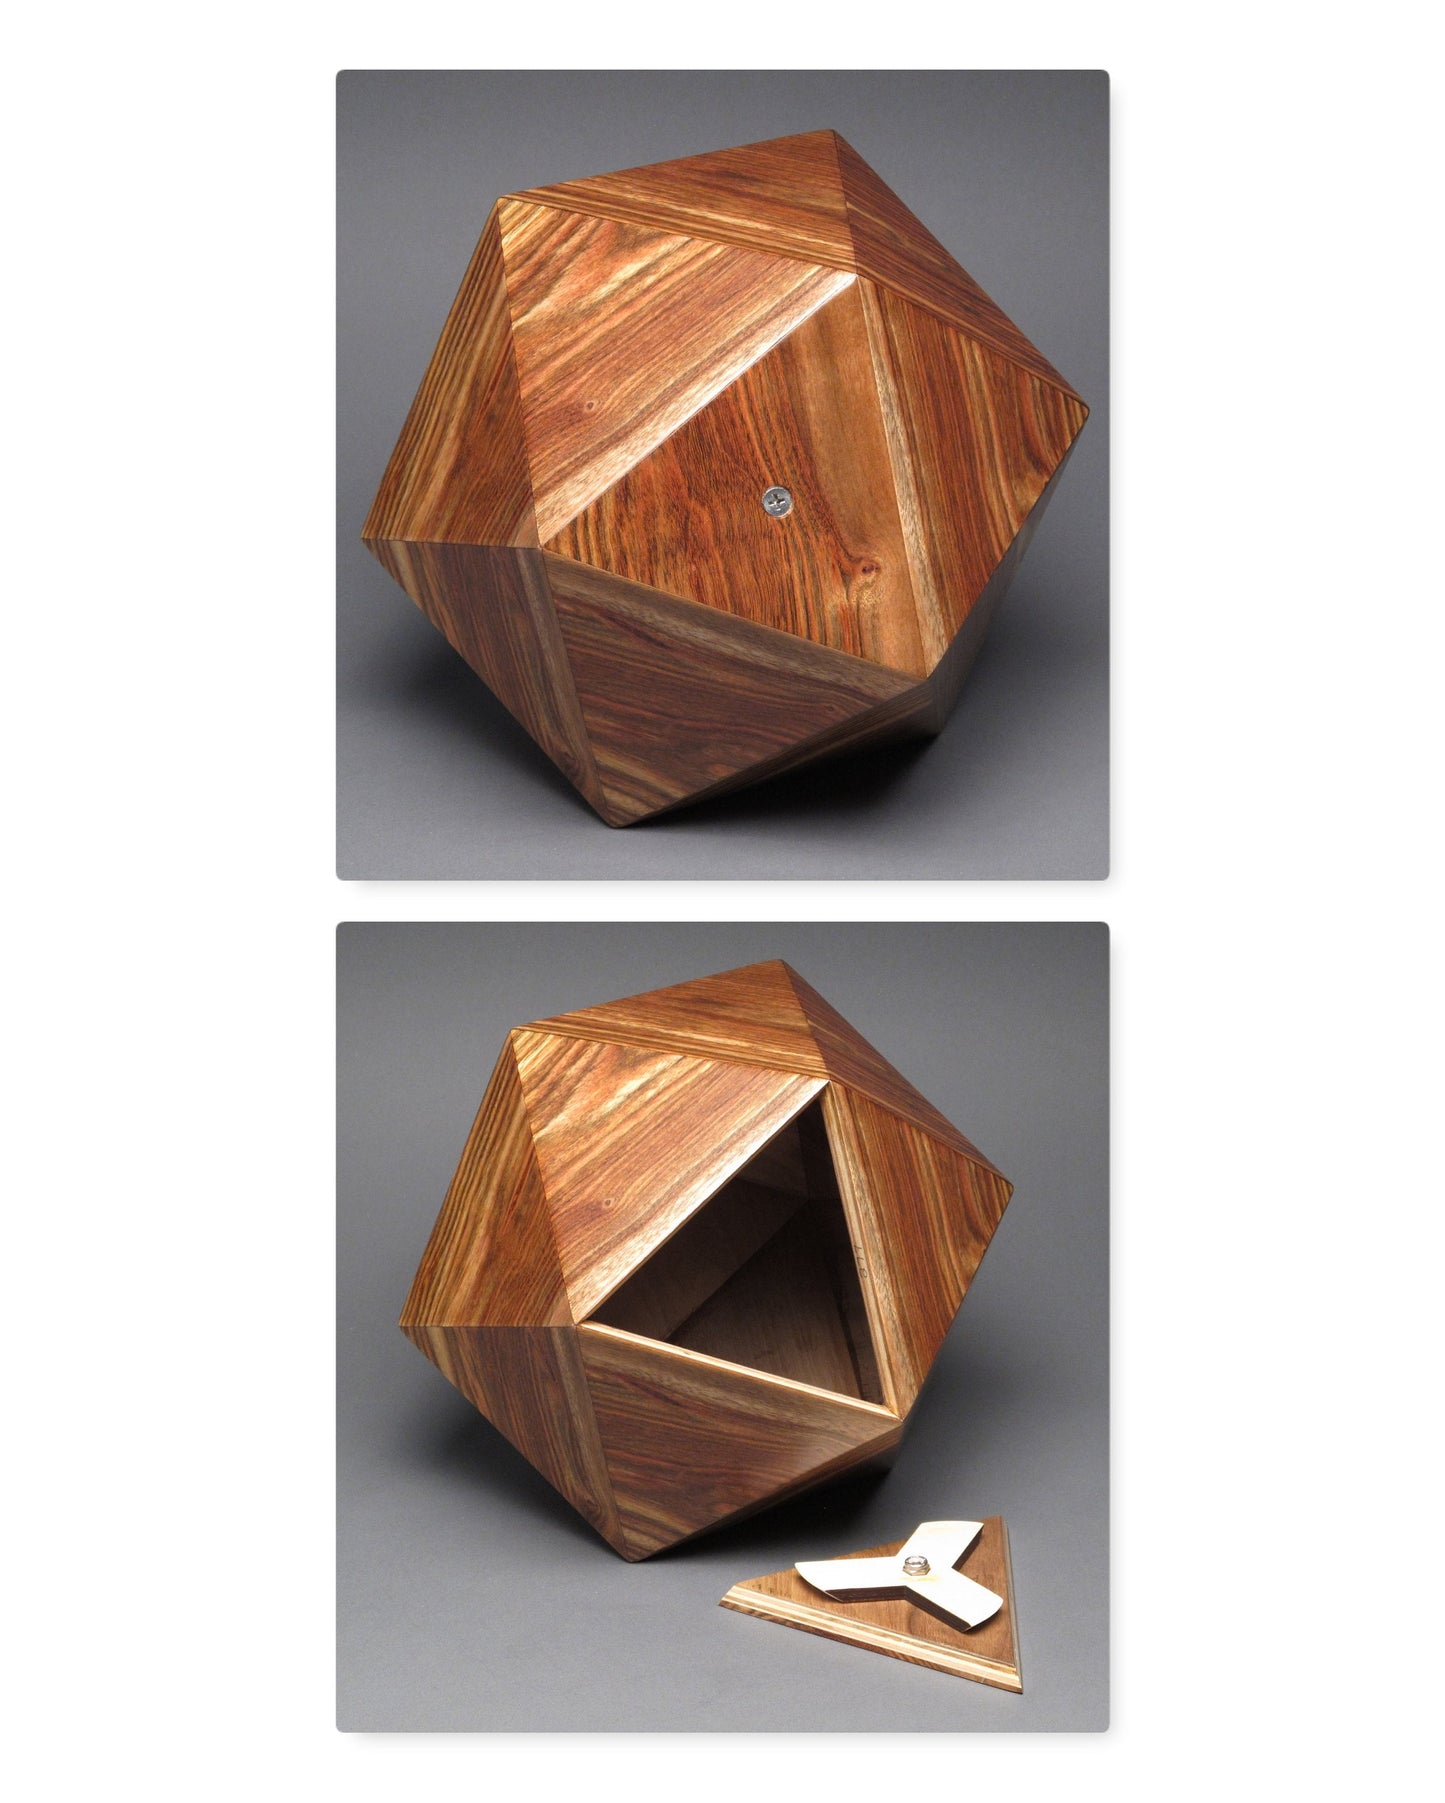 Limited Edition 20-sided Wood Cremation Urn for a Small Human or Pet up to 125 pounds